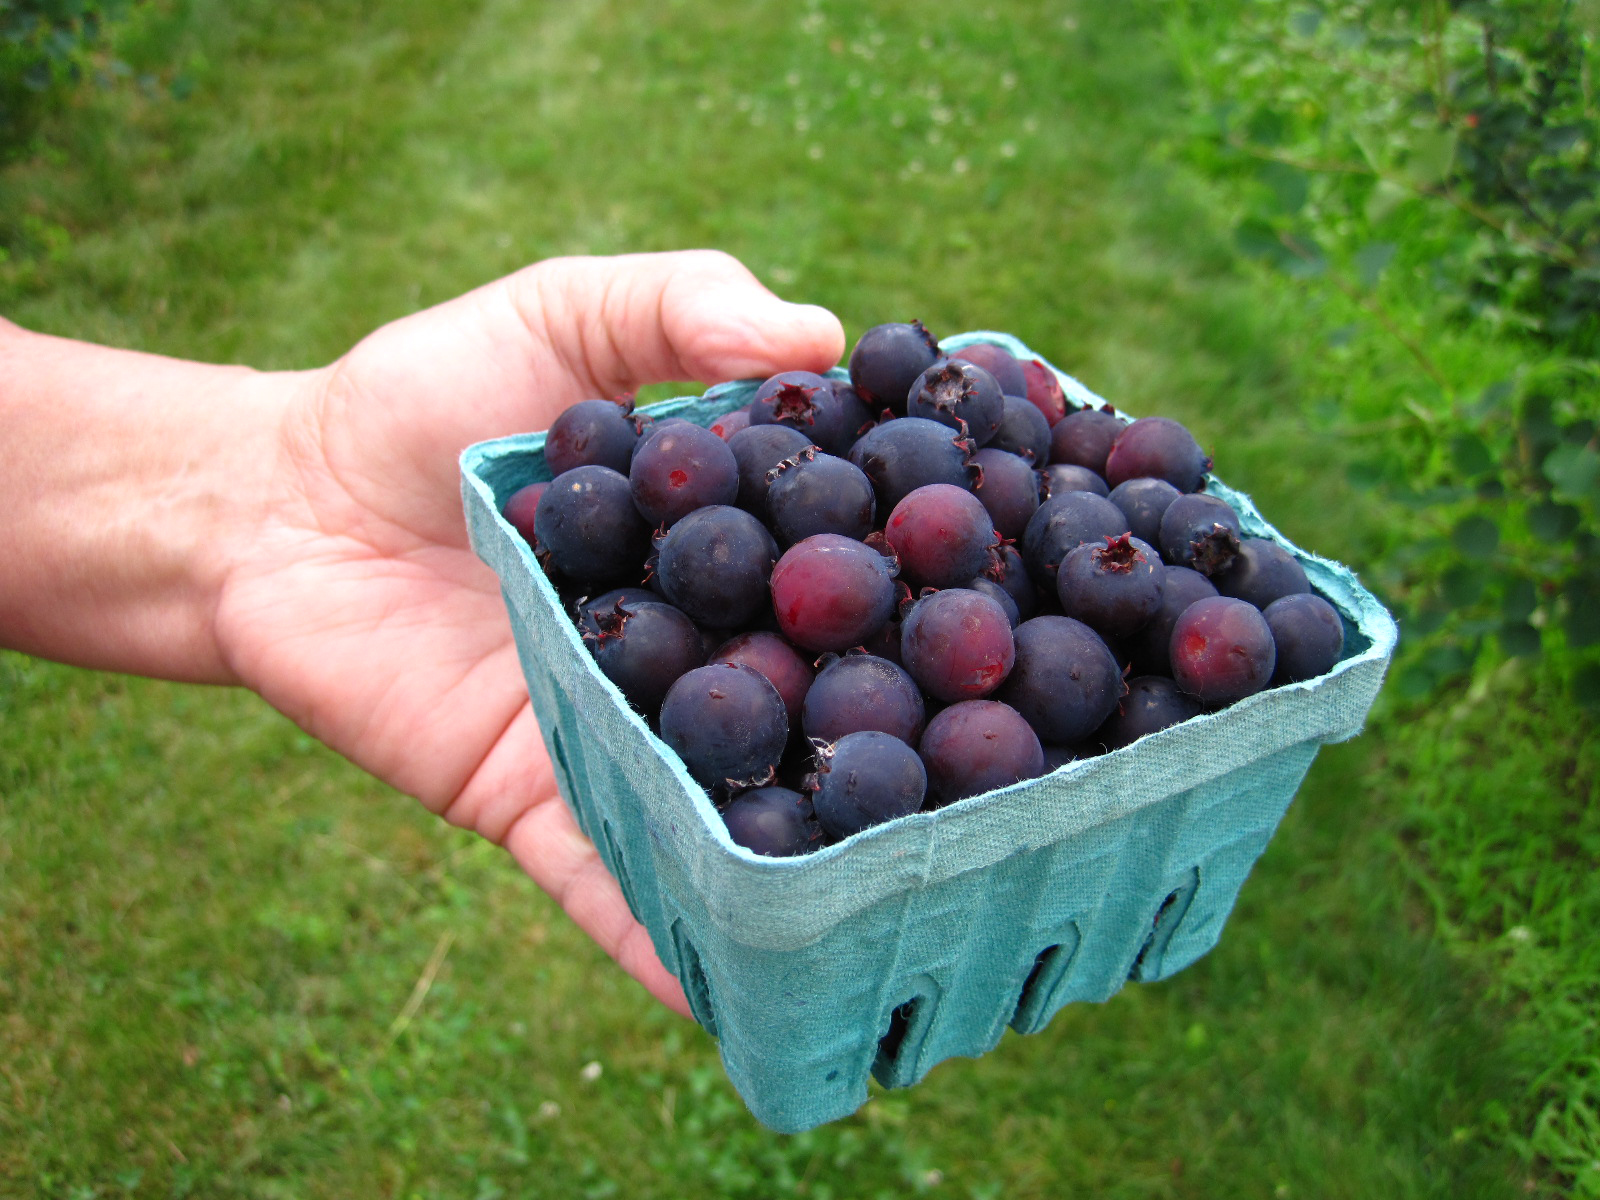 A fruit picker holds a quart basket of Saskatoon berries at G&S Orchards in Walworth, N.Y. on June 26, 2013 .